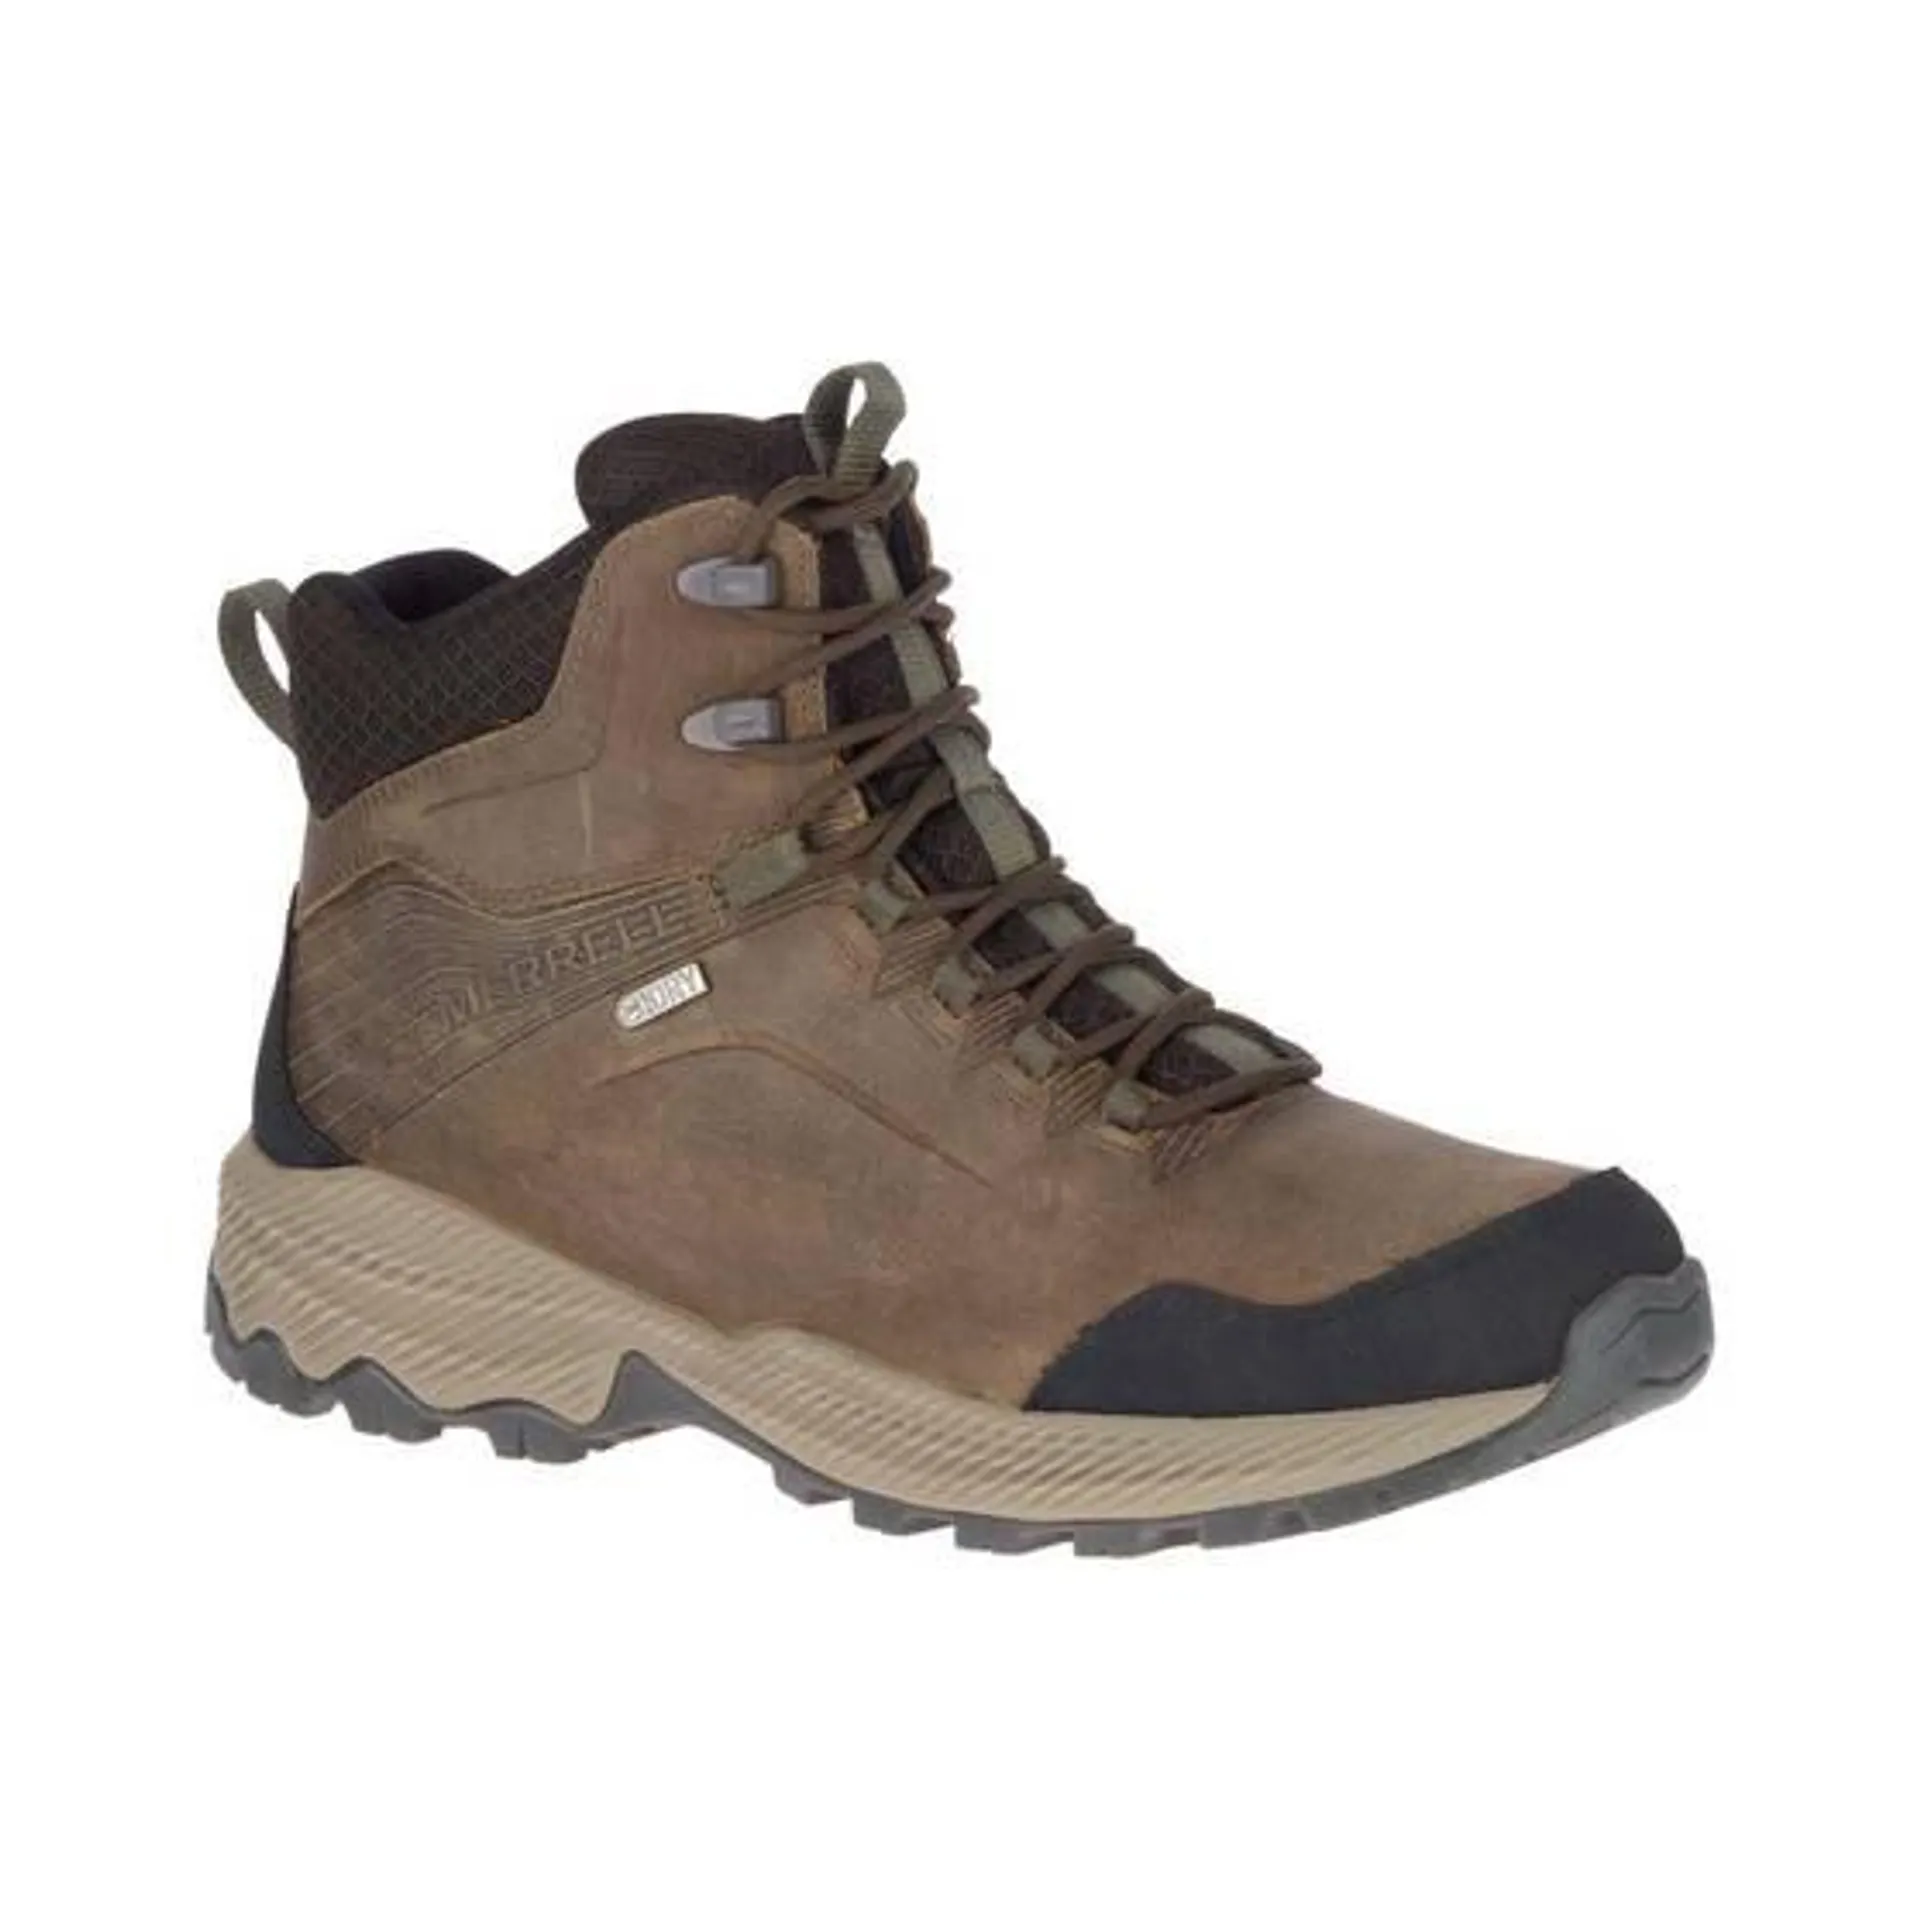 Merrell Men's Forestbound Mid Waterproof Hiking Boots